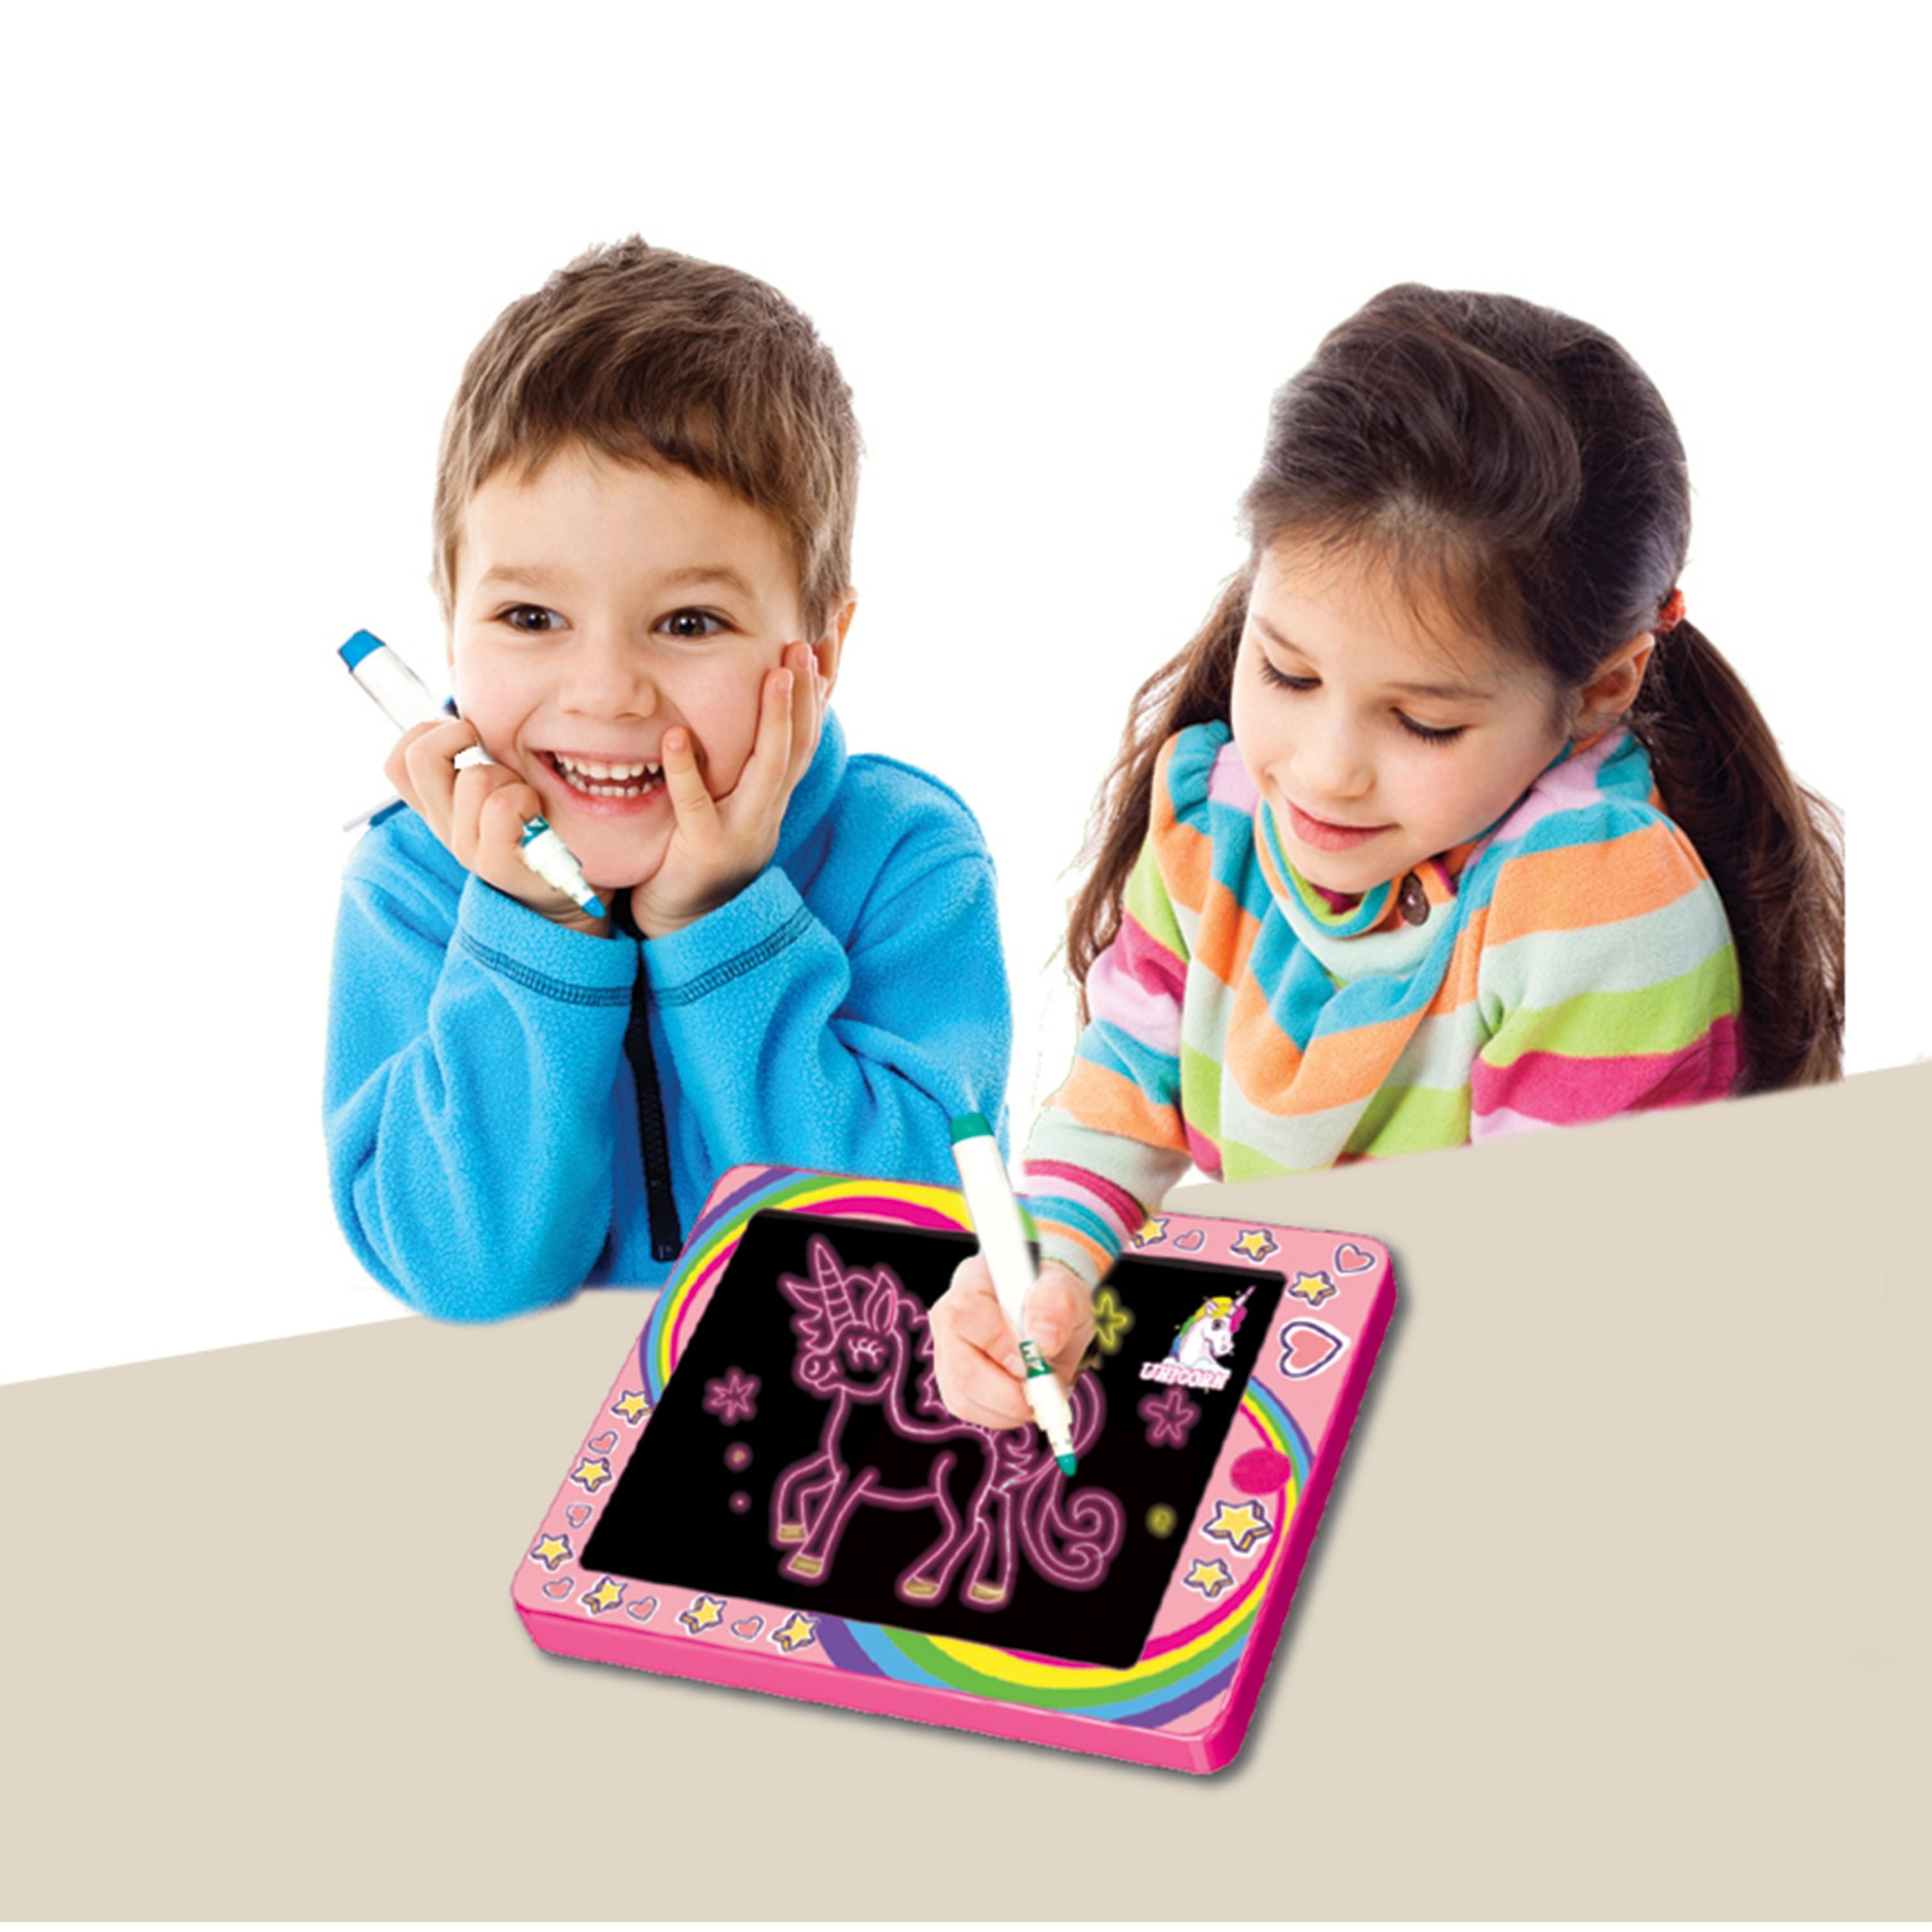 Amav Unicorn Glow Pad - Portable Unicorn Tablet-Sized Drawing Board with 2 Special Markers and Blinking Colored Lights!